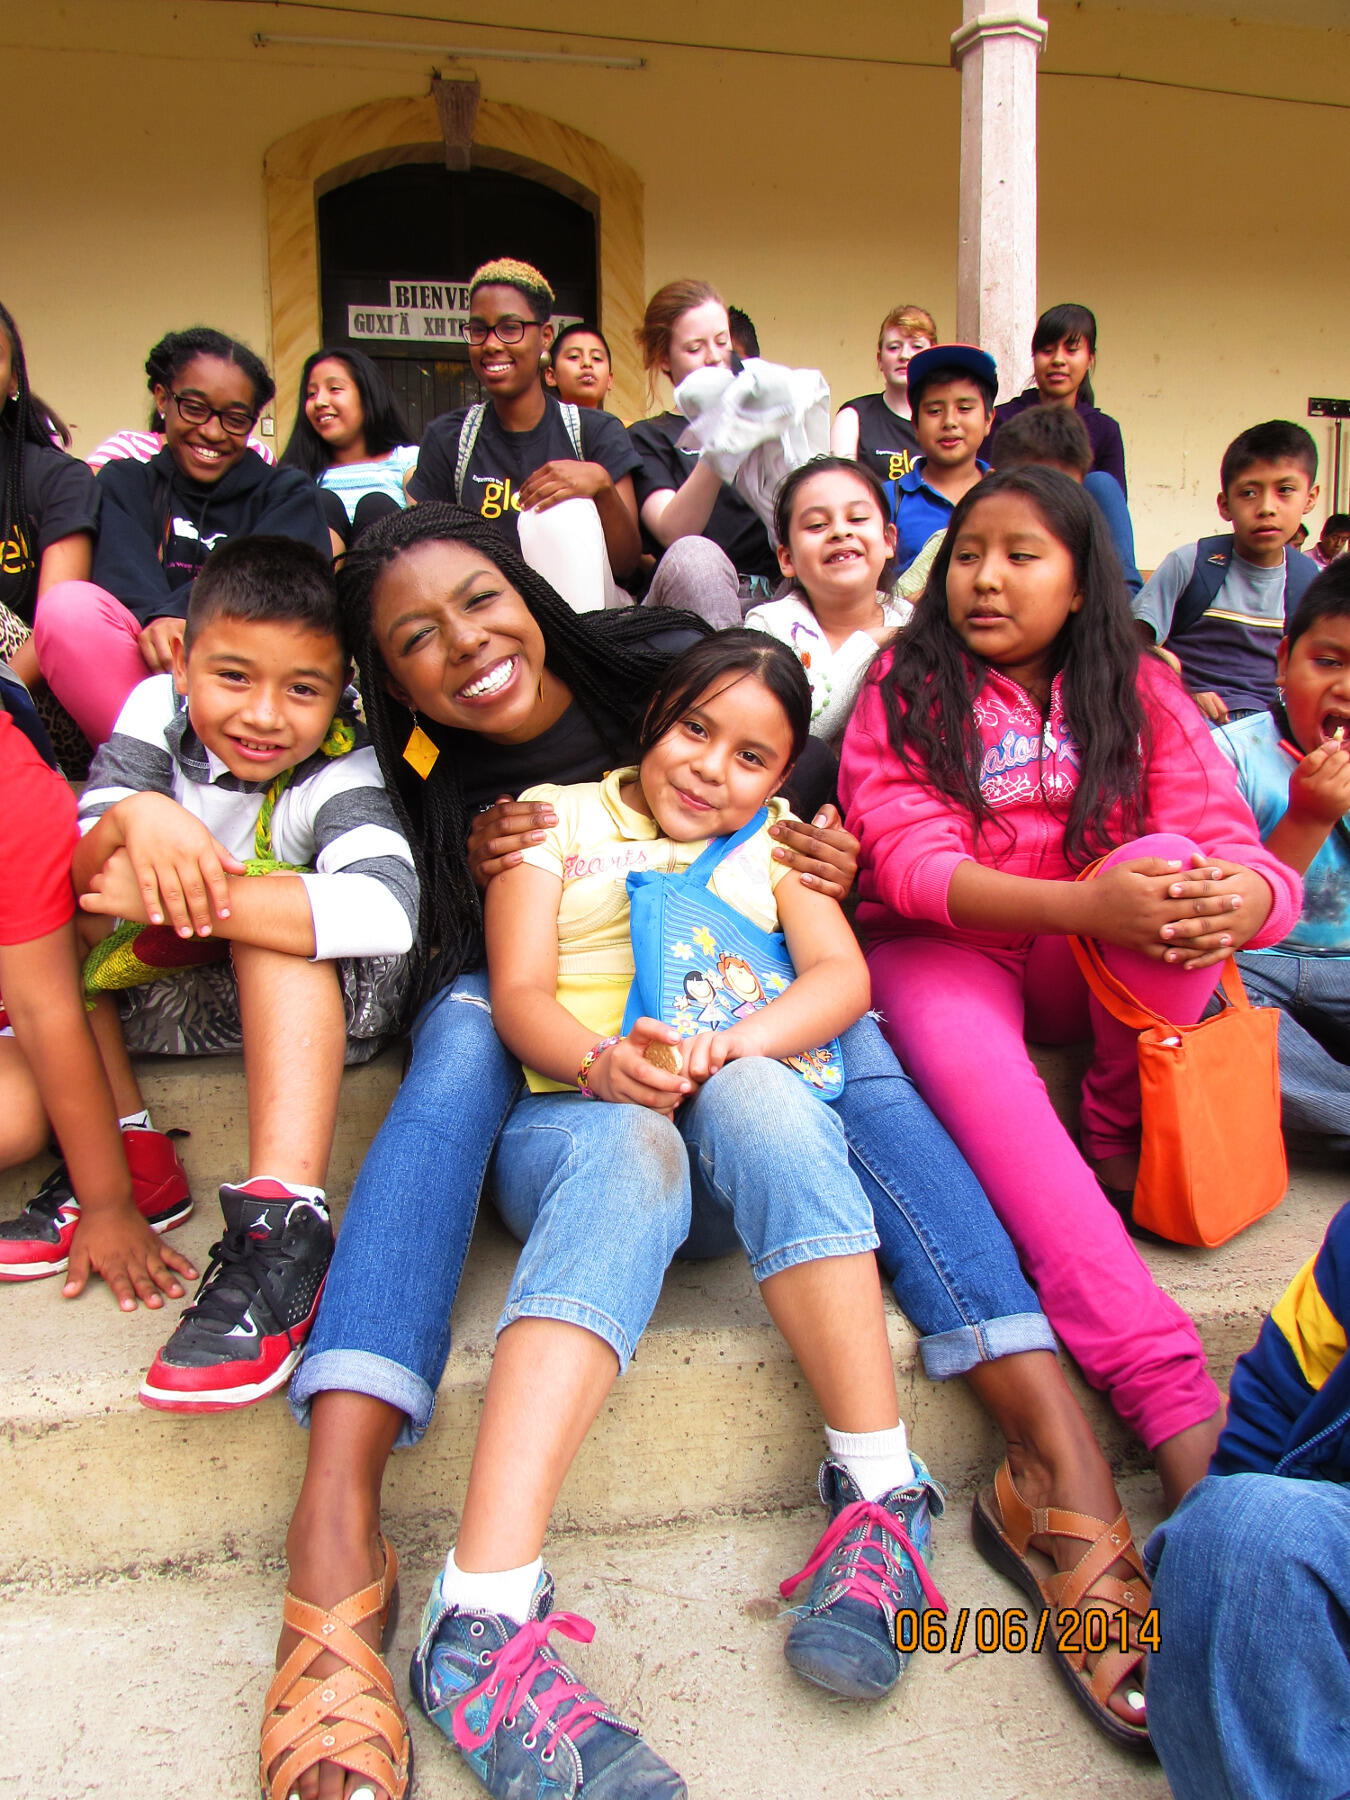 Cydni Gordon and other VCU Globe students pose with local children on the steps of the village municipal building in Teotitlán del Valle during a service-learning trip in 2014.